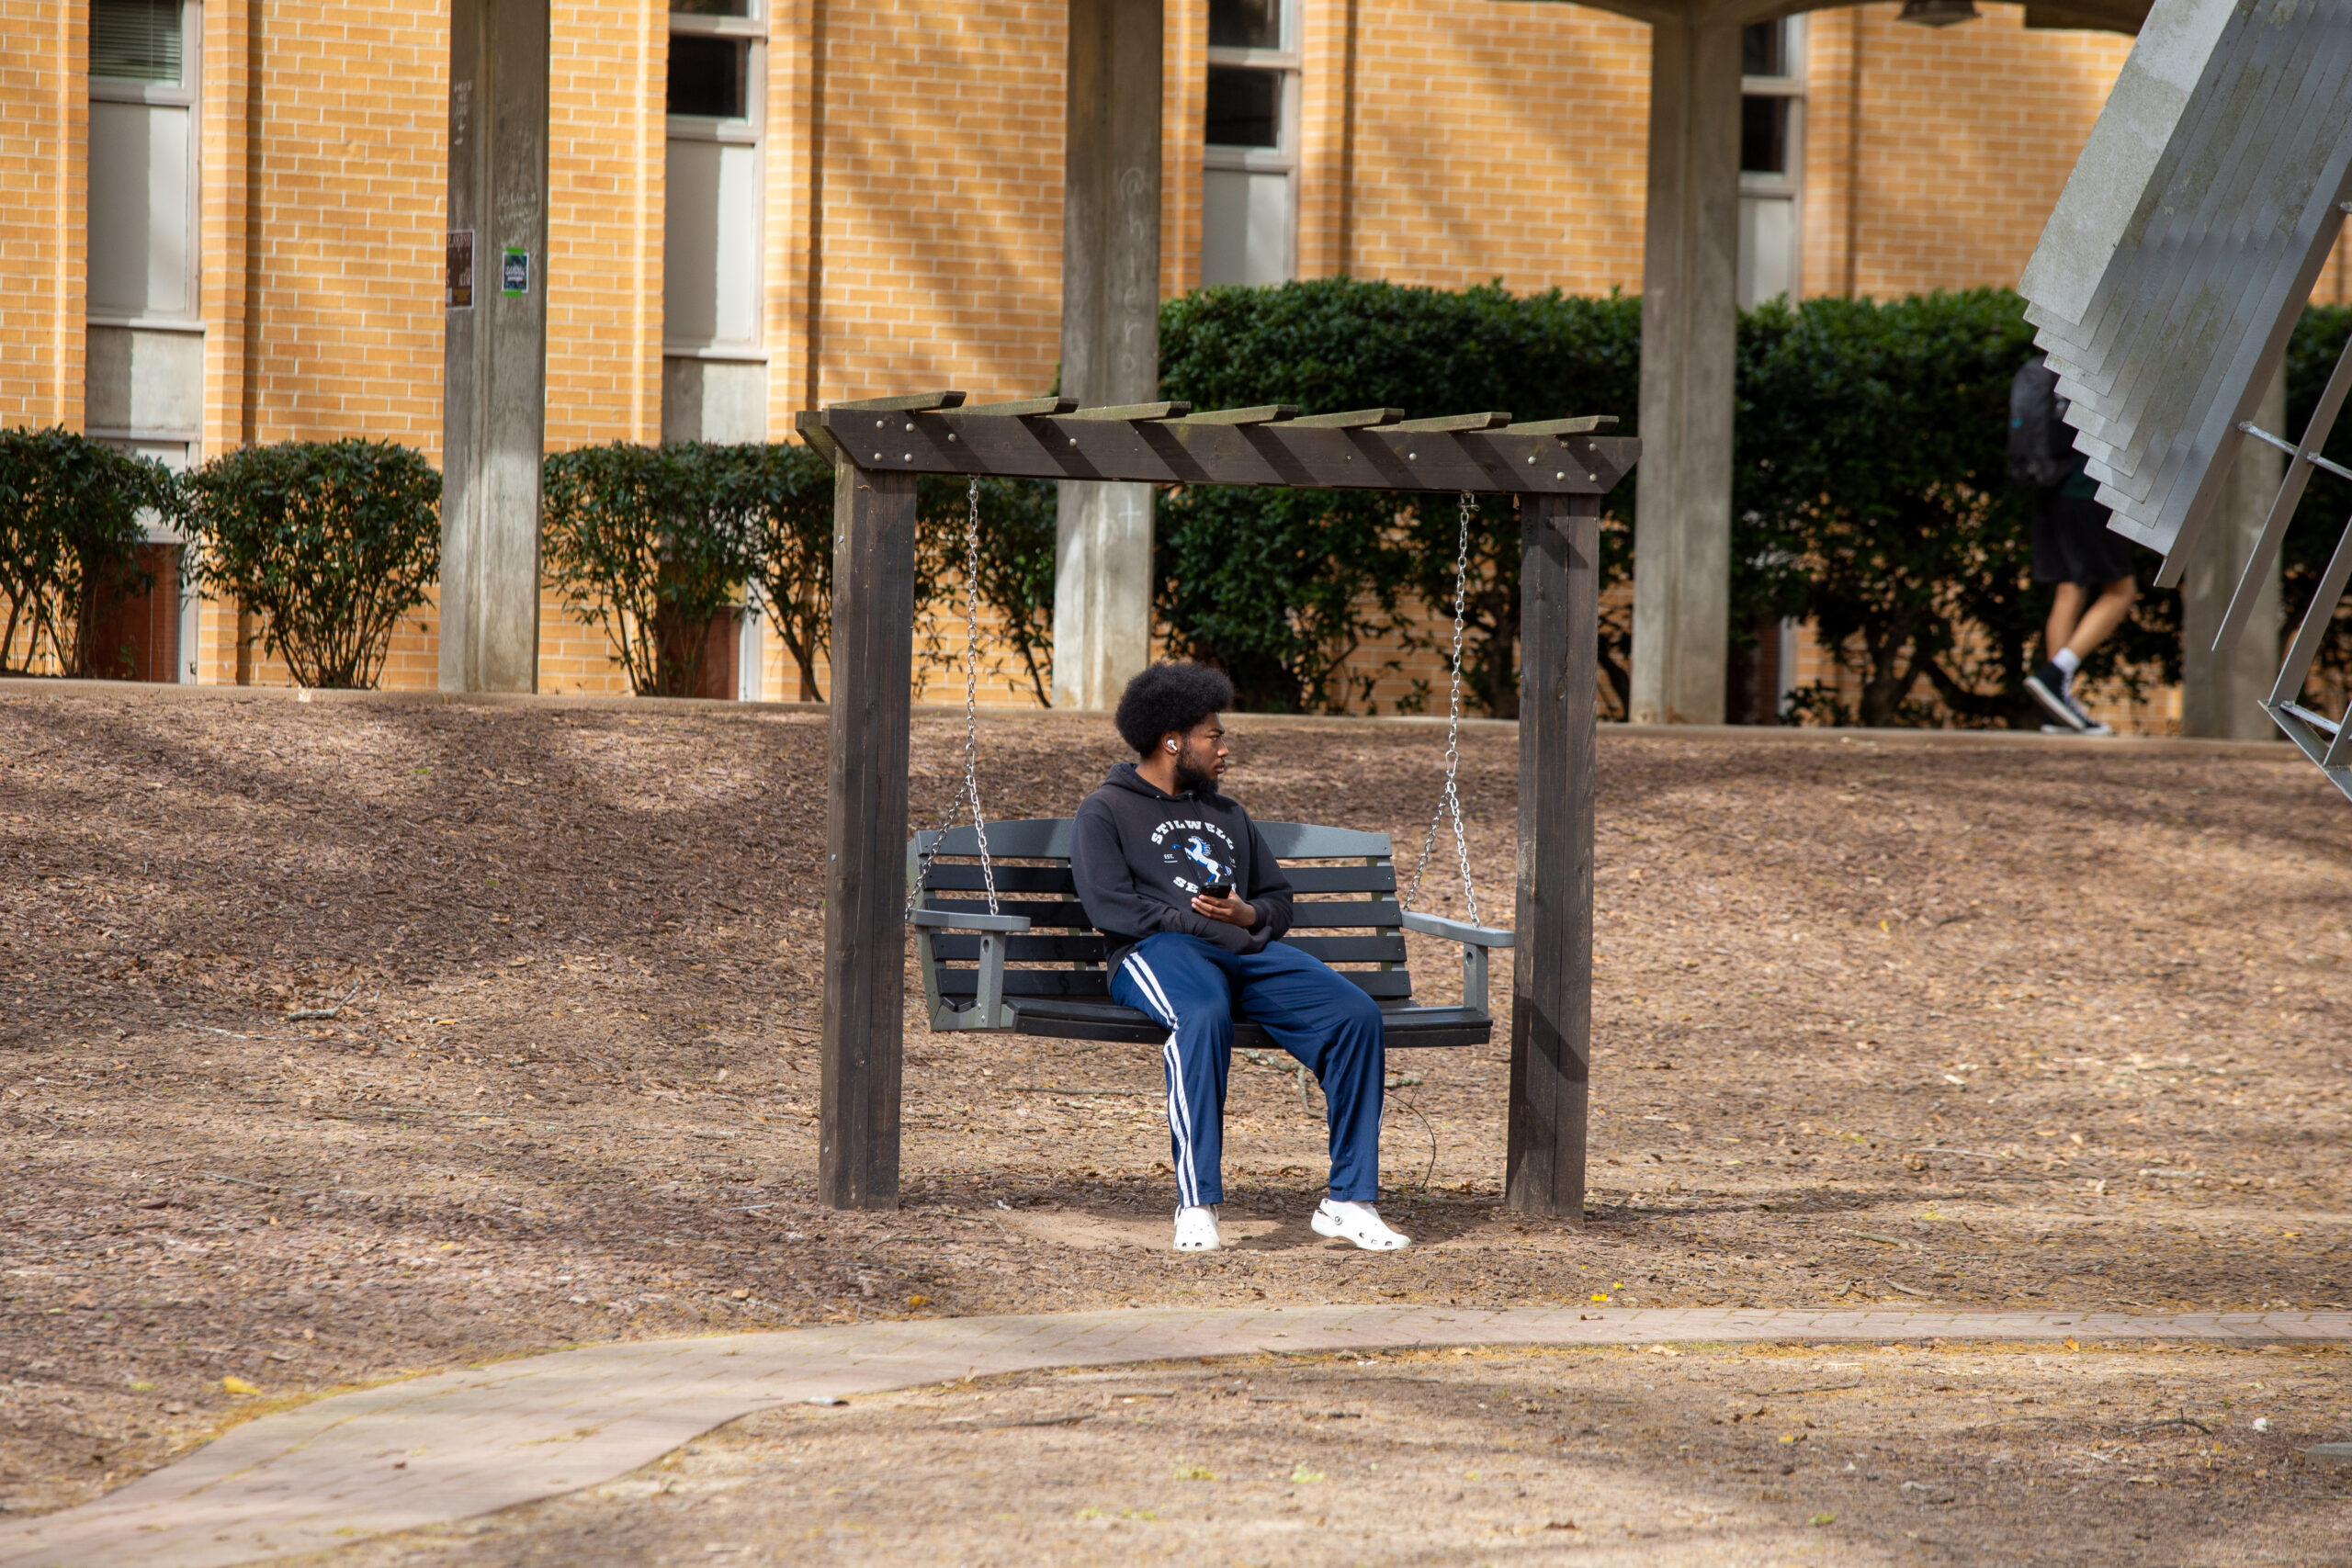 OPINION: Requiem for campus swings